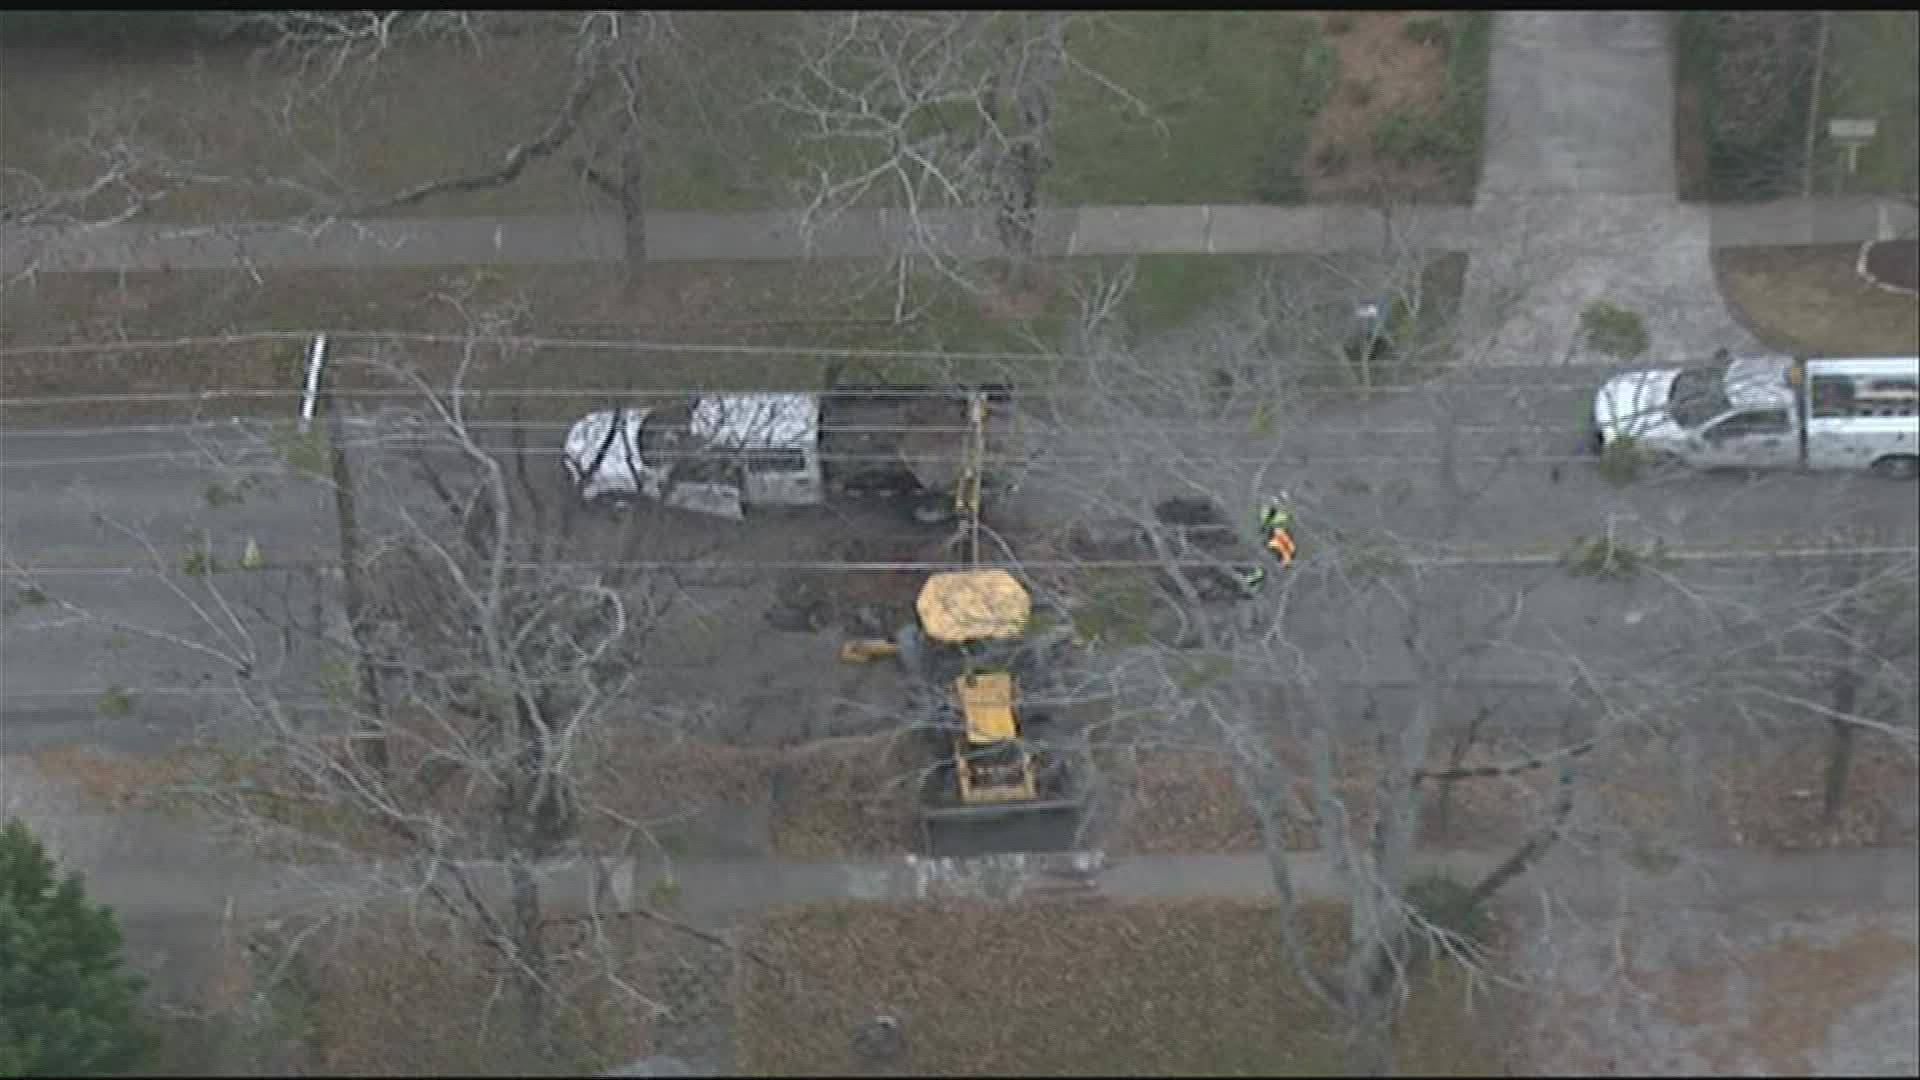 Norcross Police said North Peachtree Street is closed between Buchanan Drive and Sunset Drive.